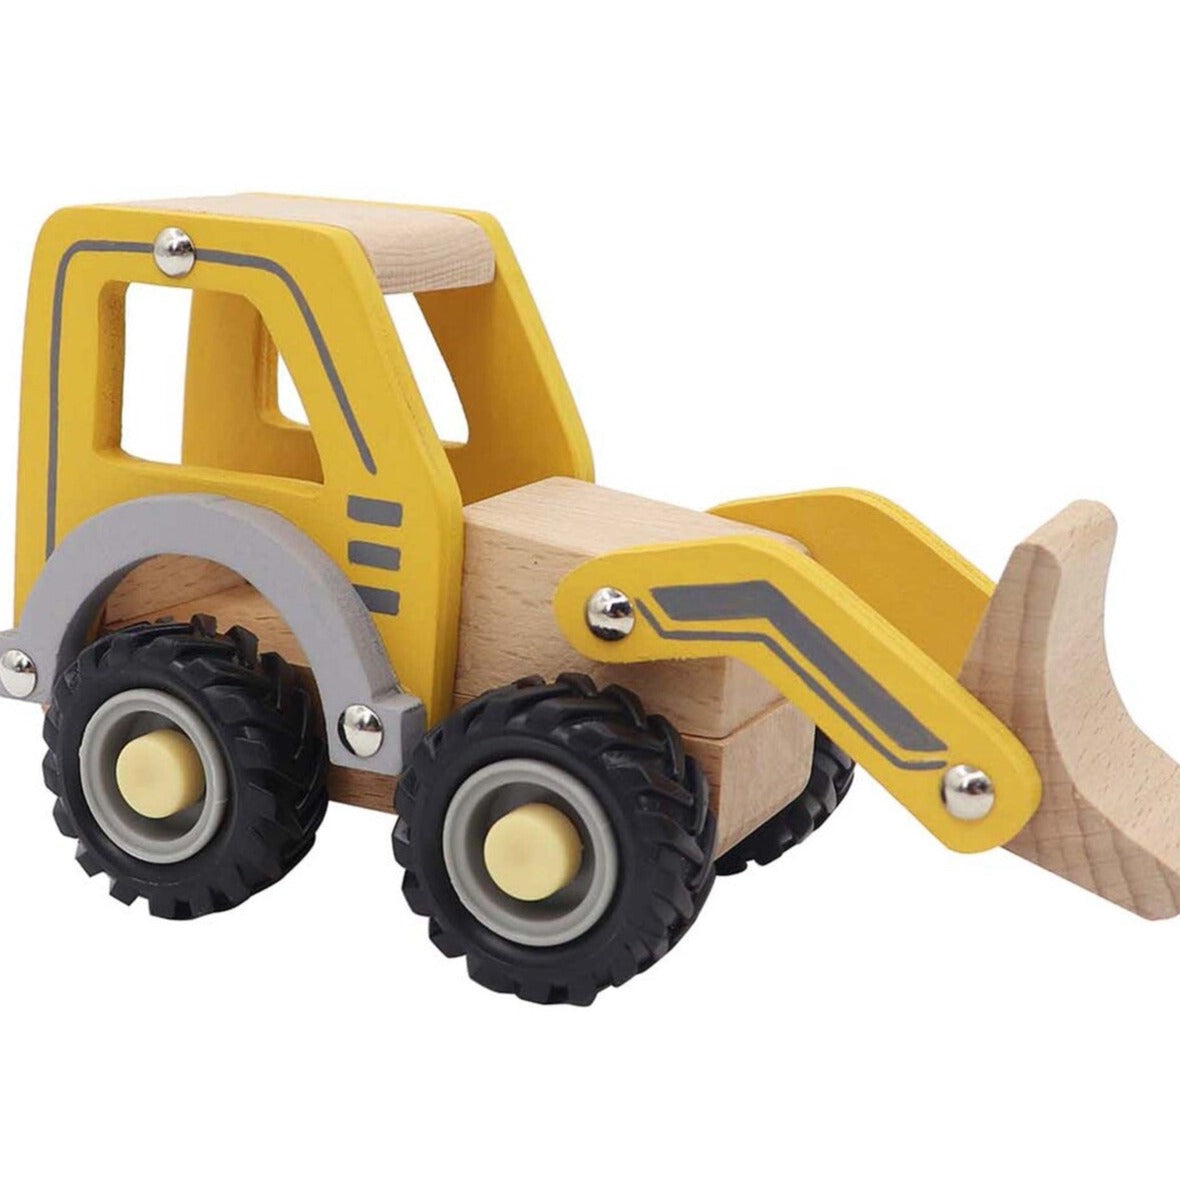 wooden toy bulldozer - angus and dudley